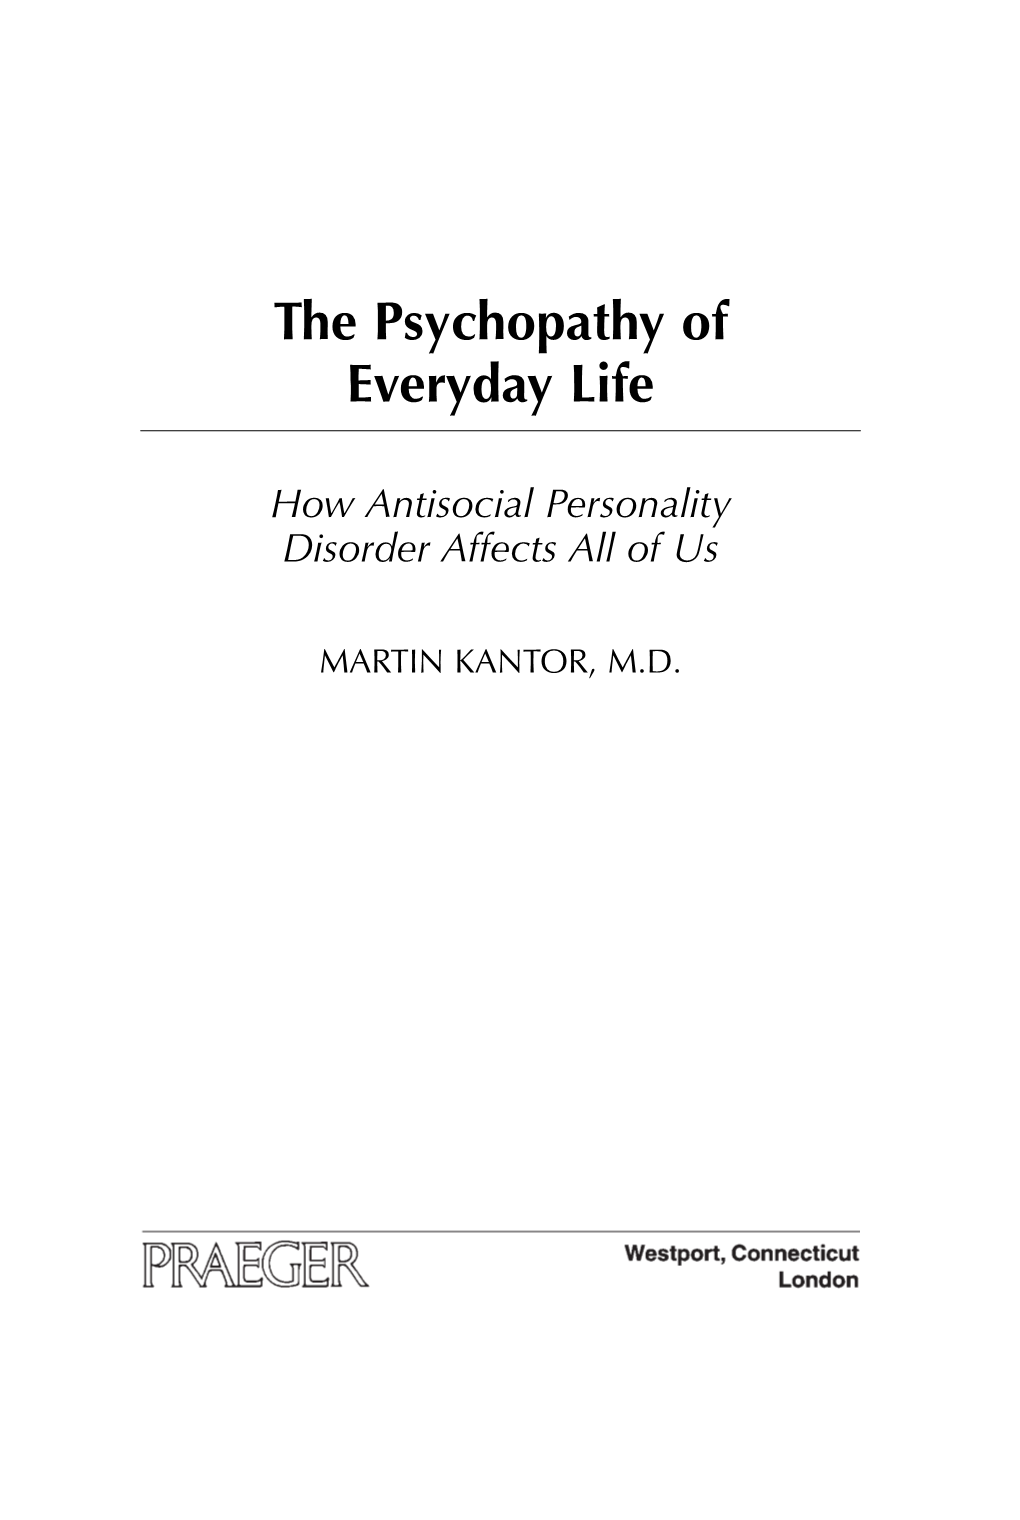 The Psychopathy of Everyday Life